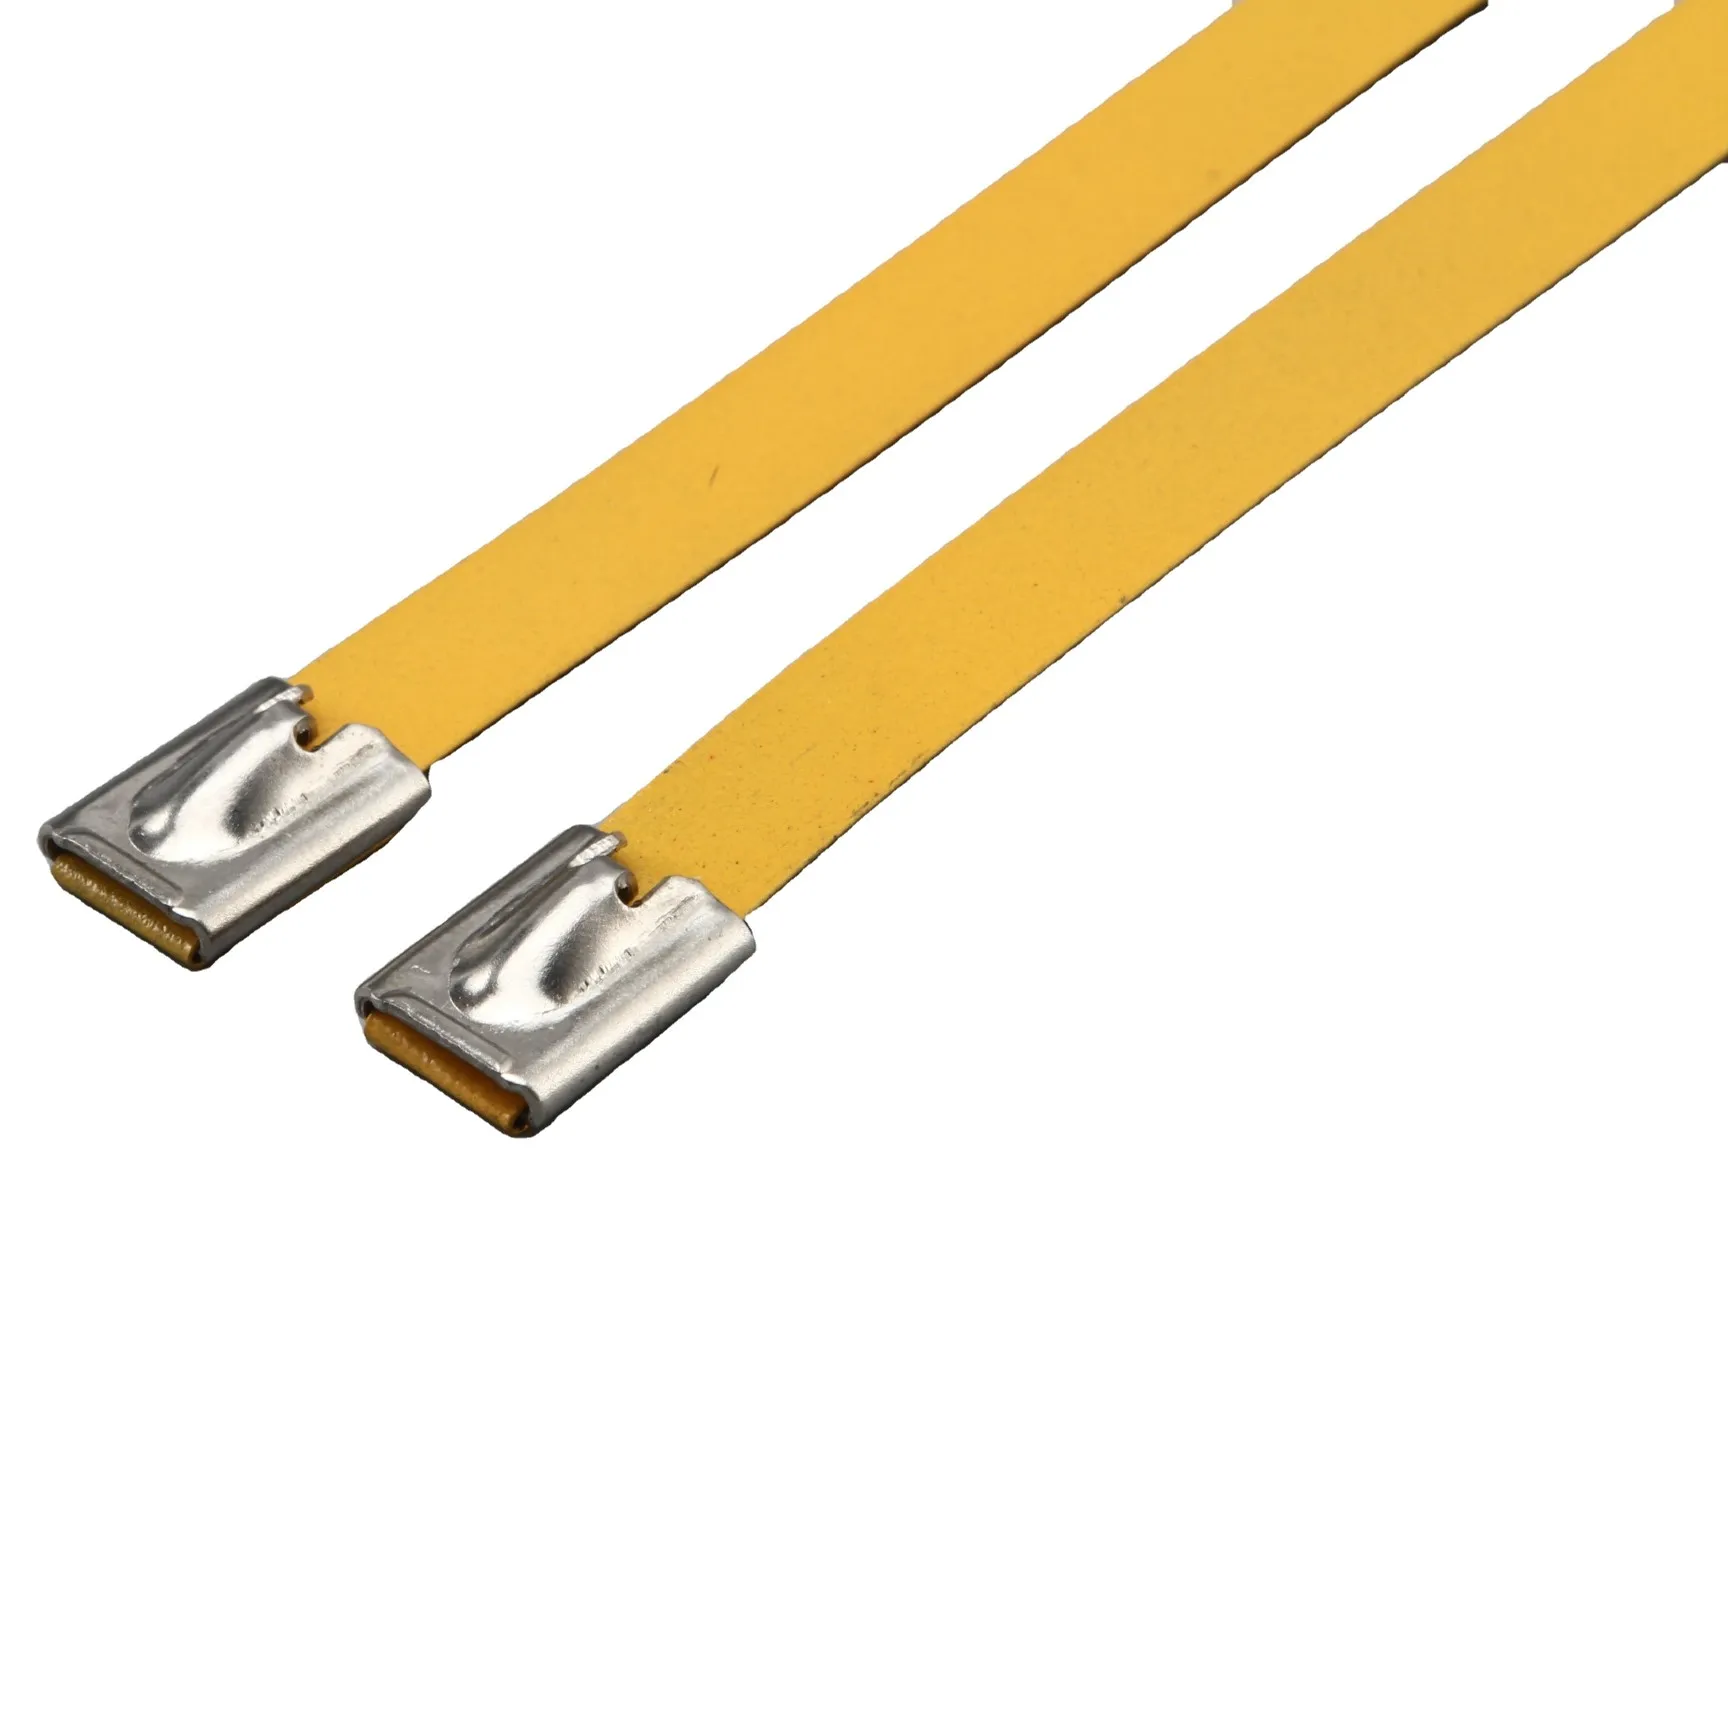 Self-locking Stainless Steel Epoxy Coated Cable Ties